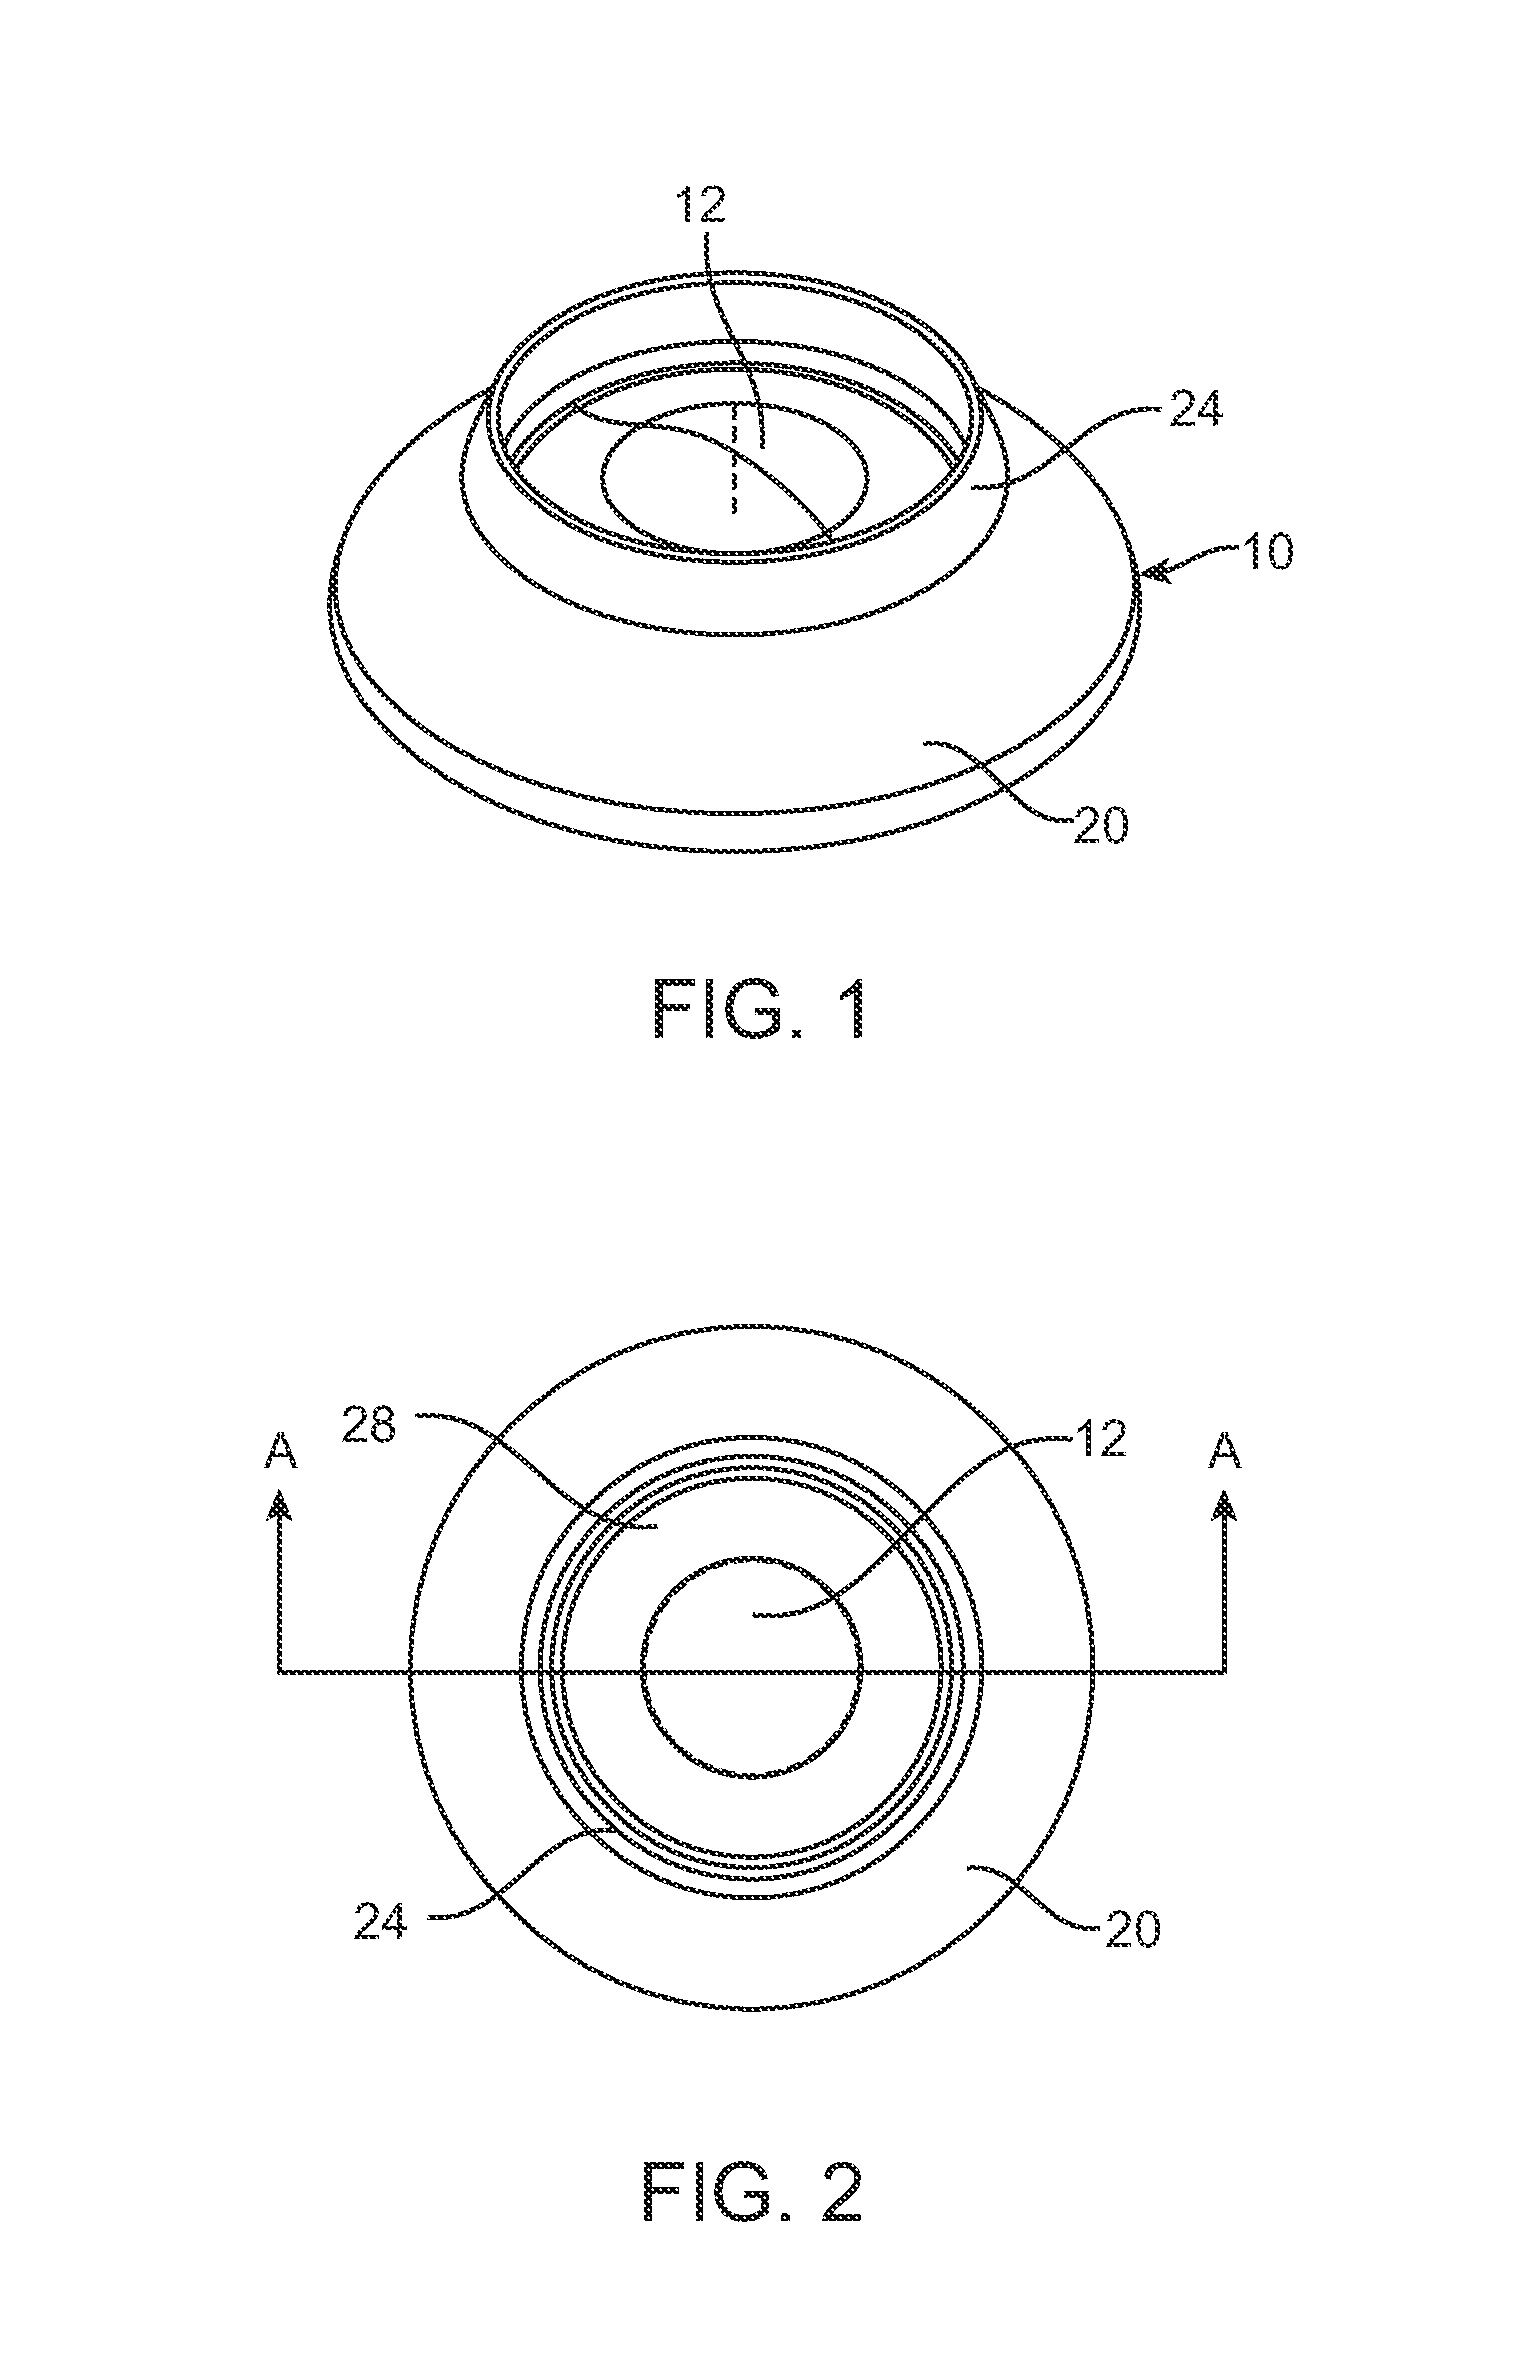 Method for fabricating simulated tissue structures by means of multi material 3D printing